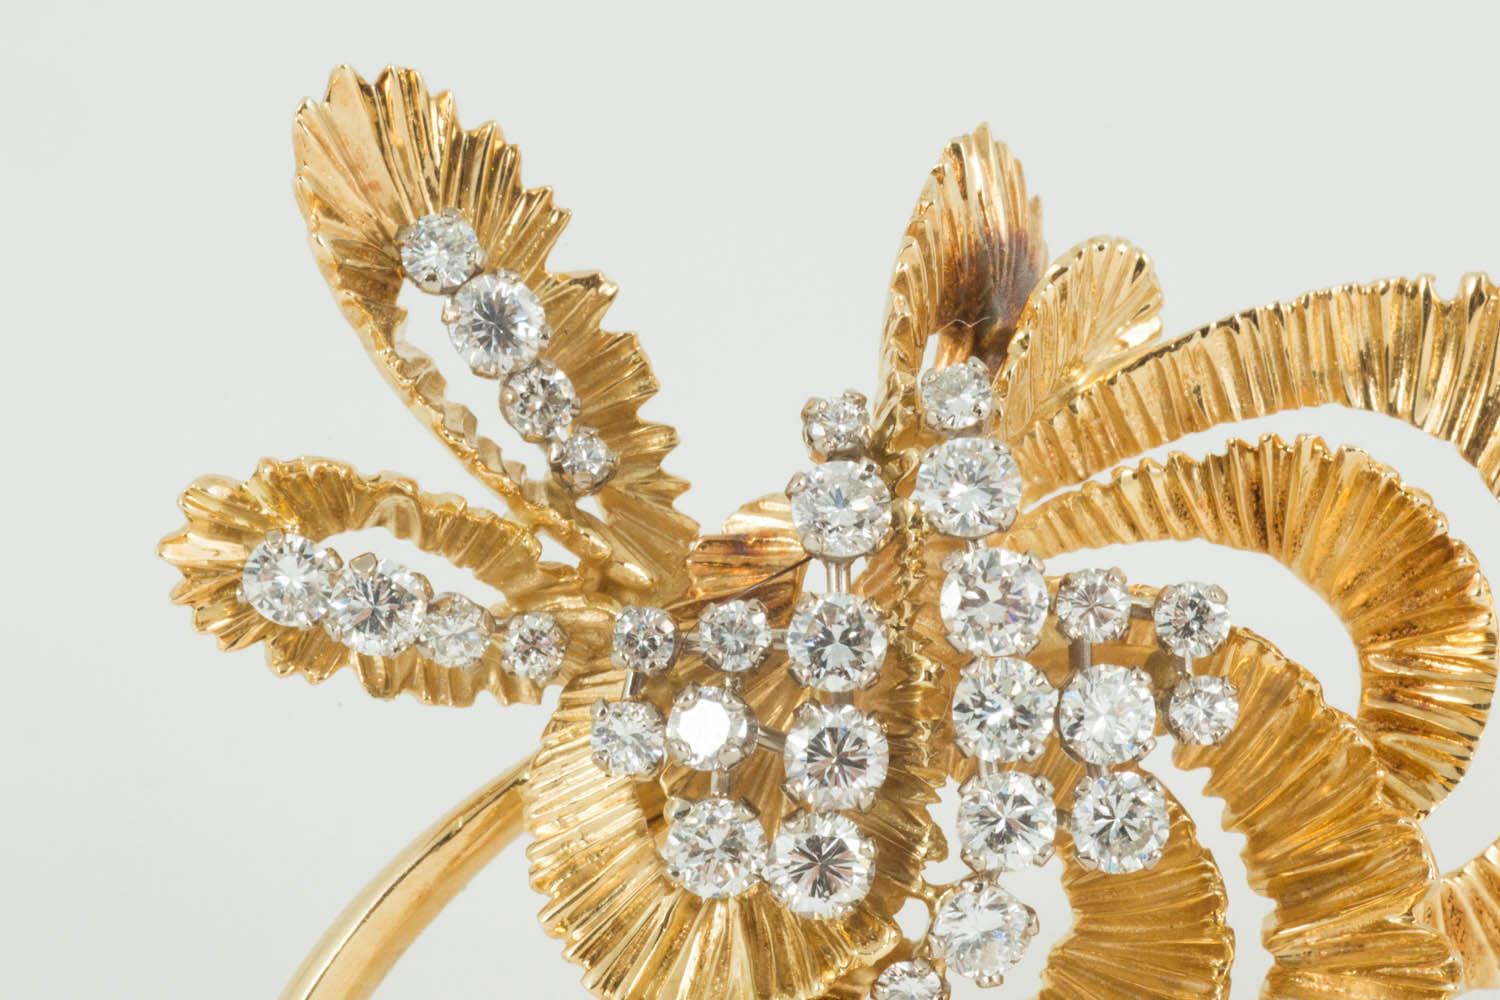 18 carat yellow gold spray brooch by Kutchinsky in the shape of a flower. The gold is of a textured bark design and is set with 30 brilliant cut diamonds of particularly bright quality. Signed Kutchinsky and hallmarked London 1968.
Measures 55mm in